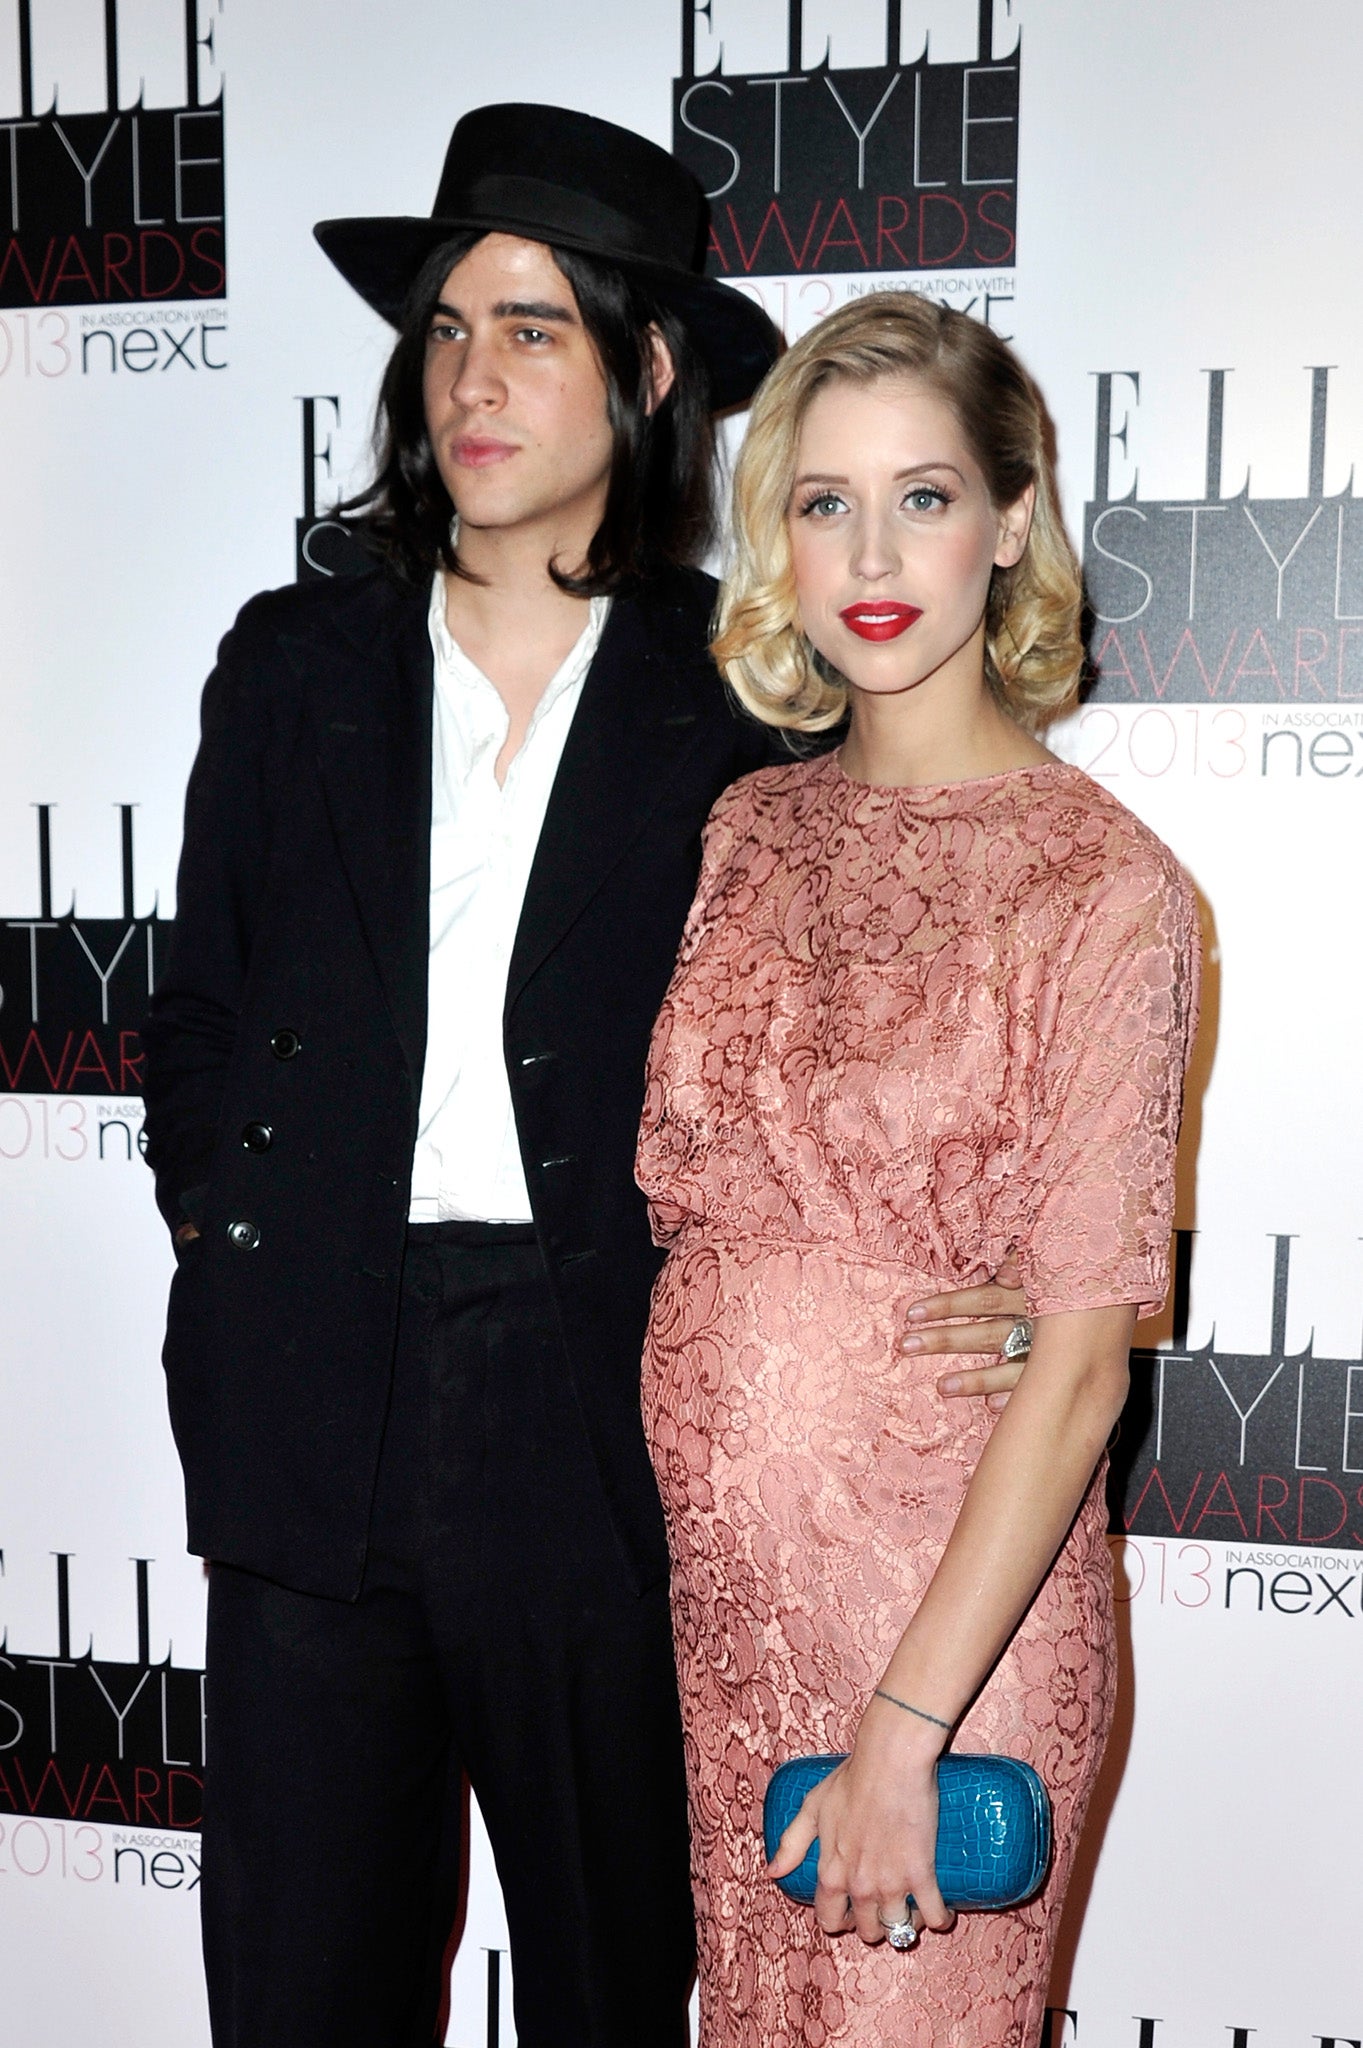 Thomas Cohen and Peaches Geldof attend the Elle Style Awards at The Savoy Hotel on February 11, 2013 in London